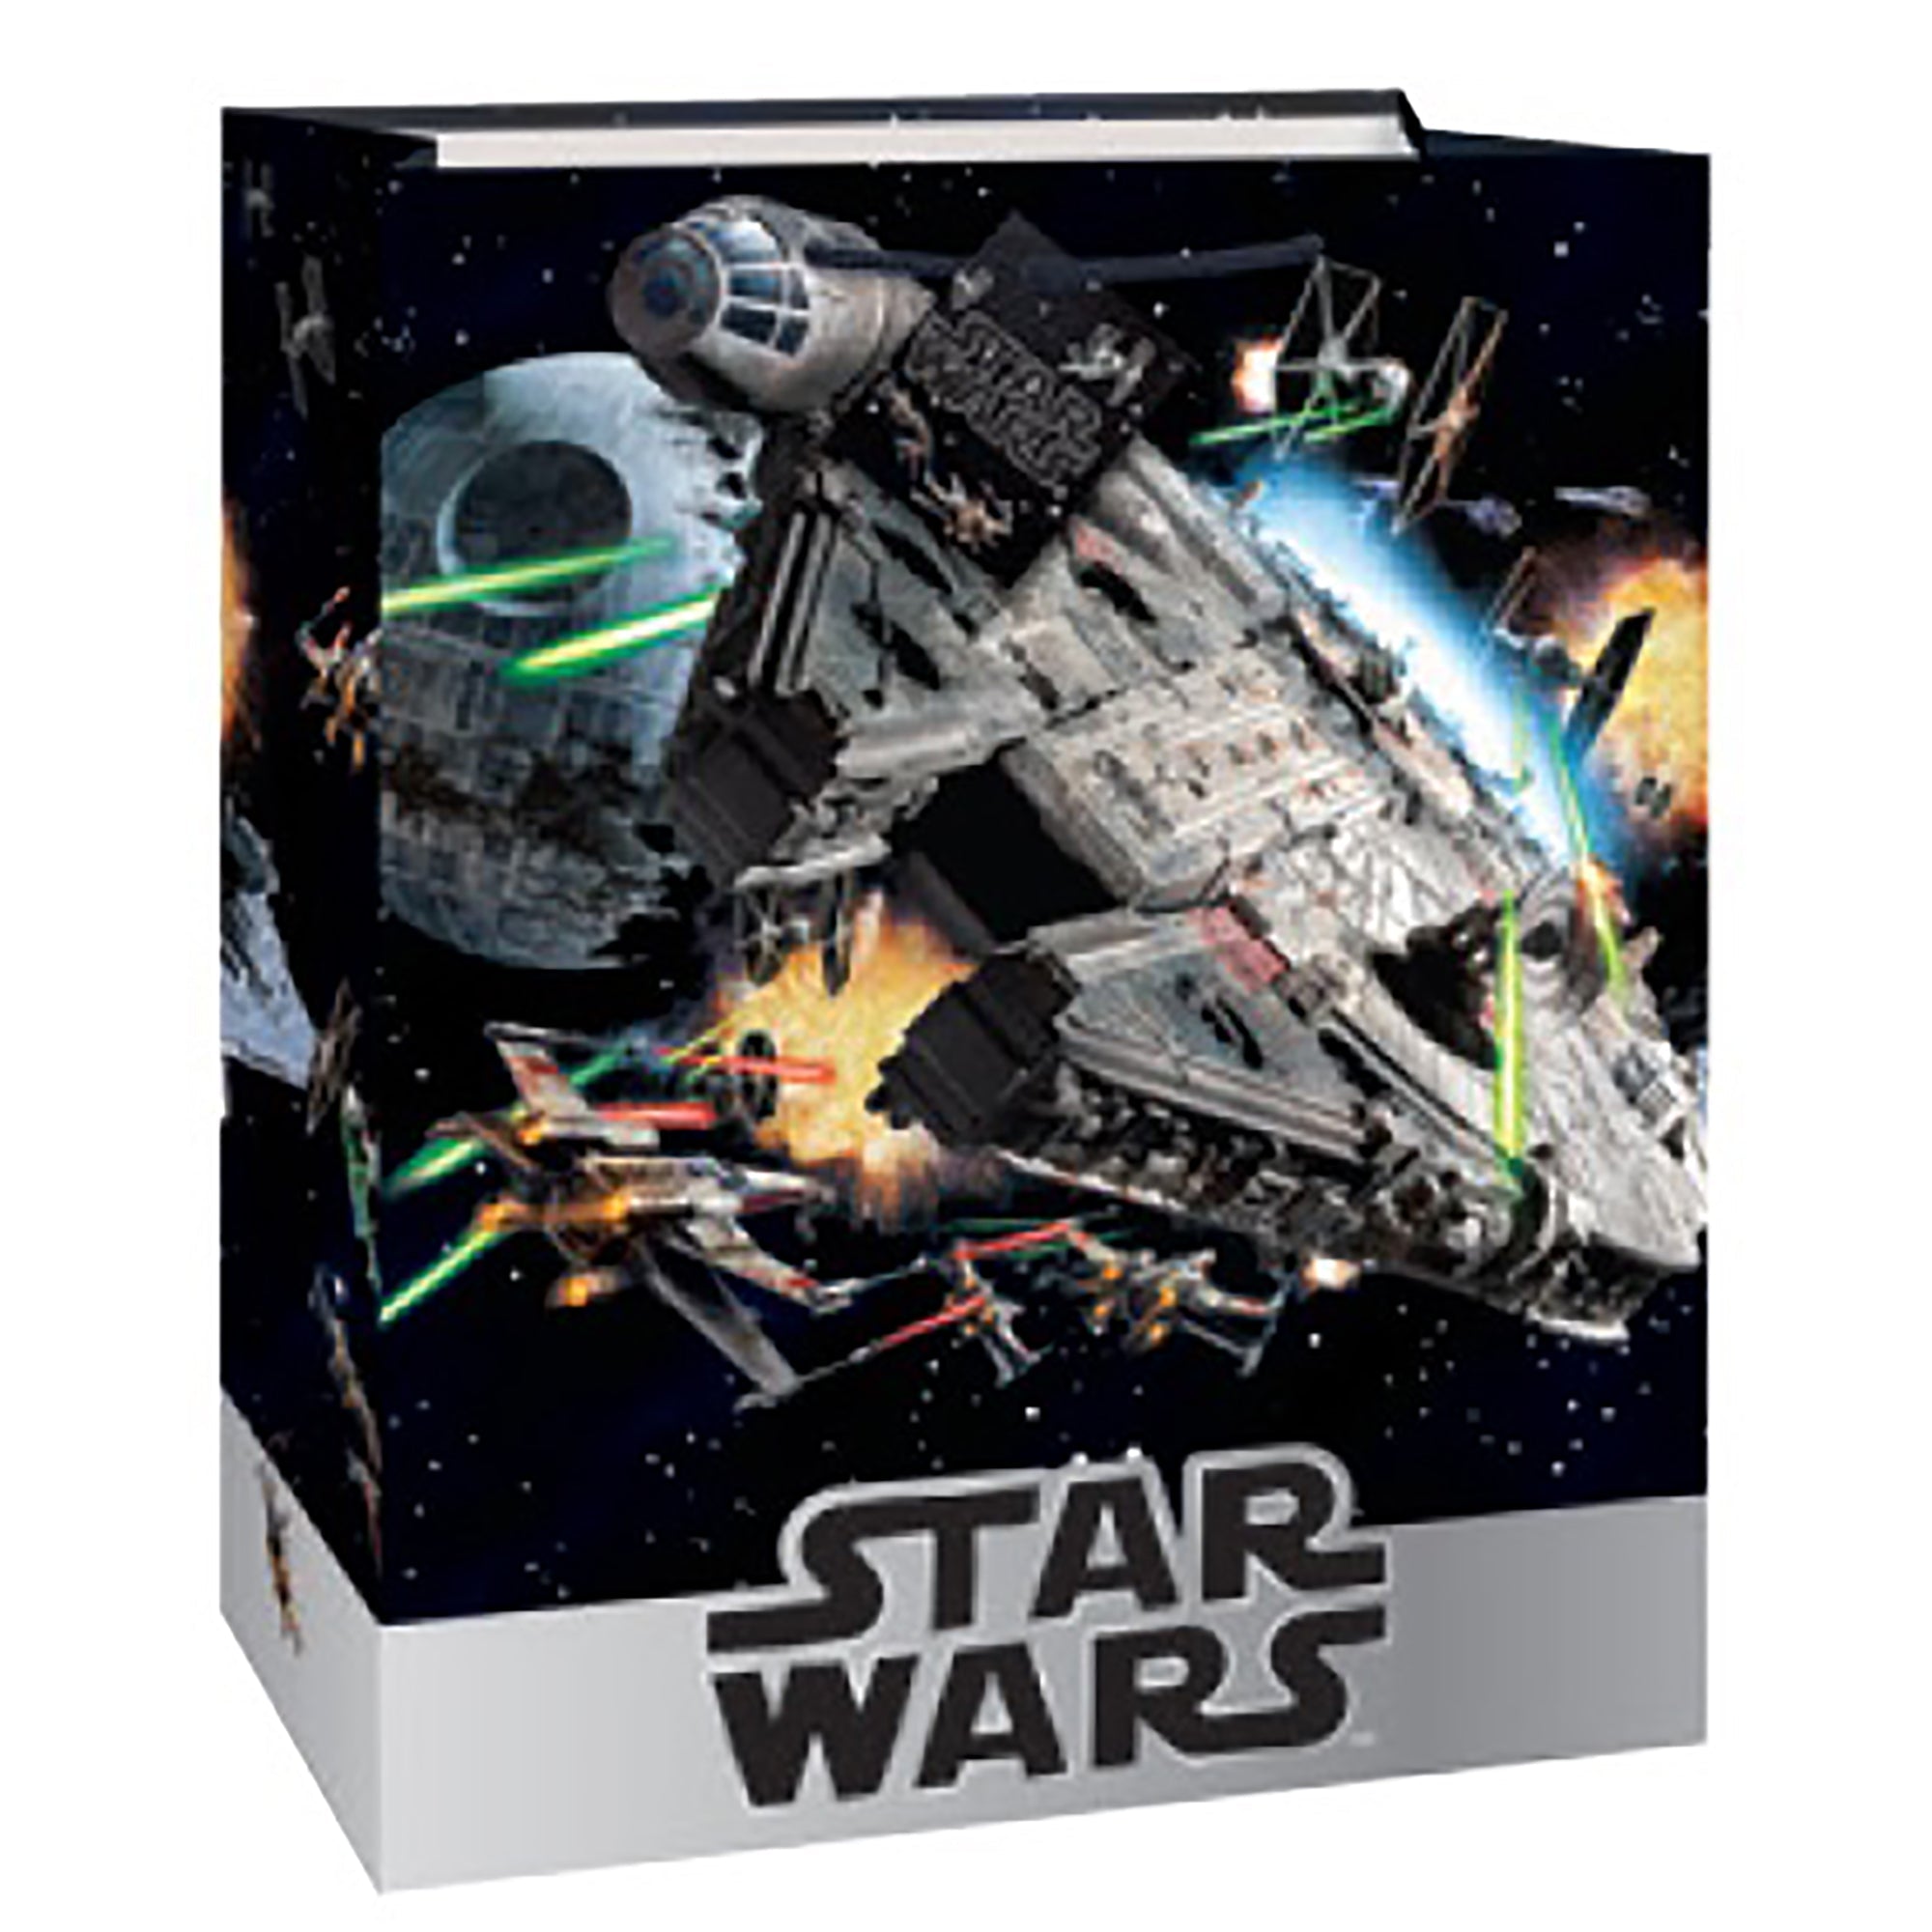 Star Wars Gift Bag Large 10.5Wx13Hx5.5D in